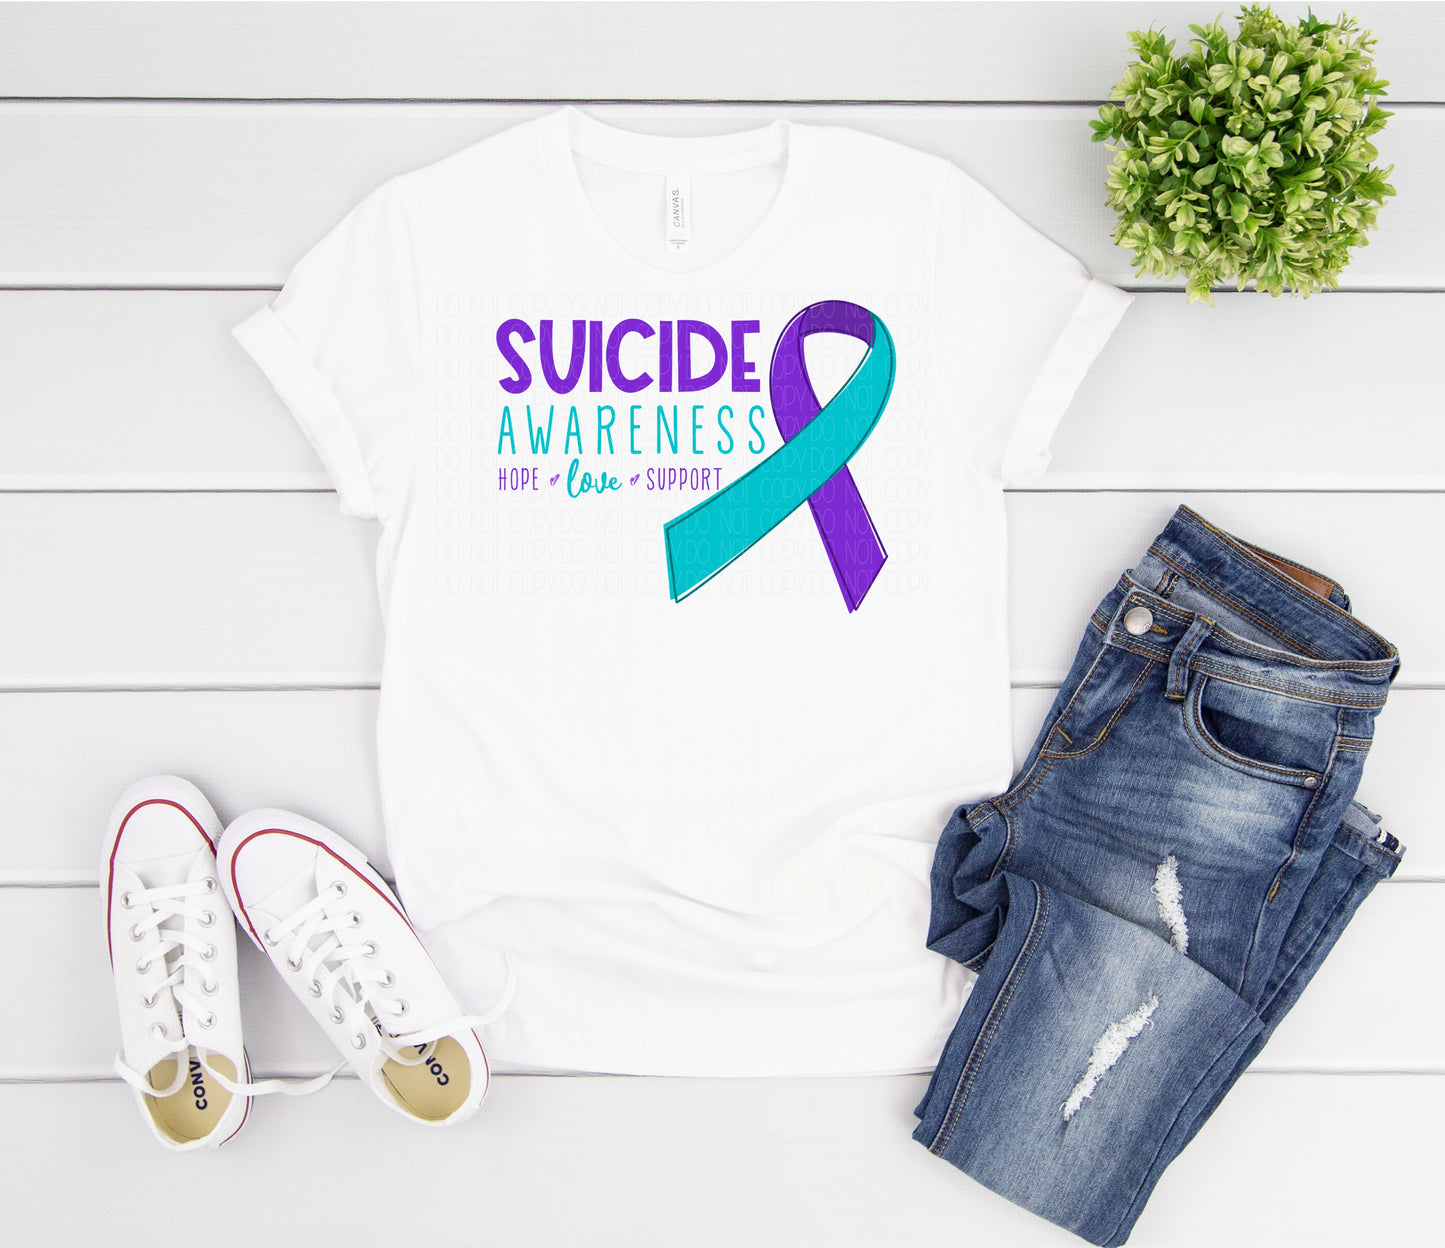 Suicide Awareness hope love support